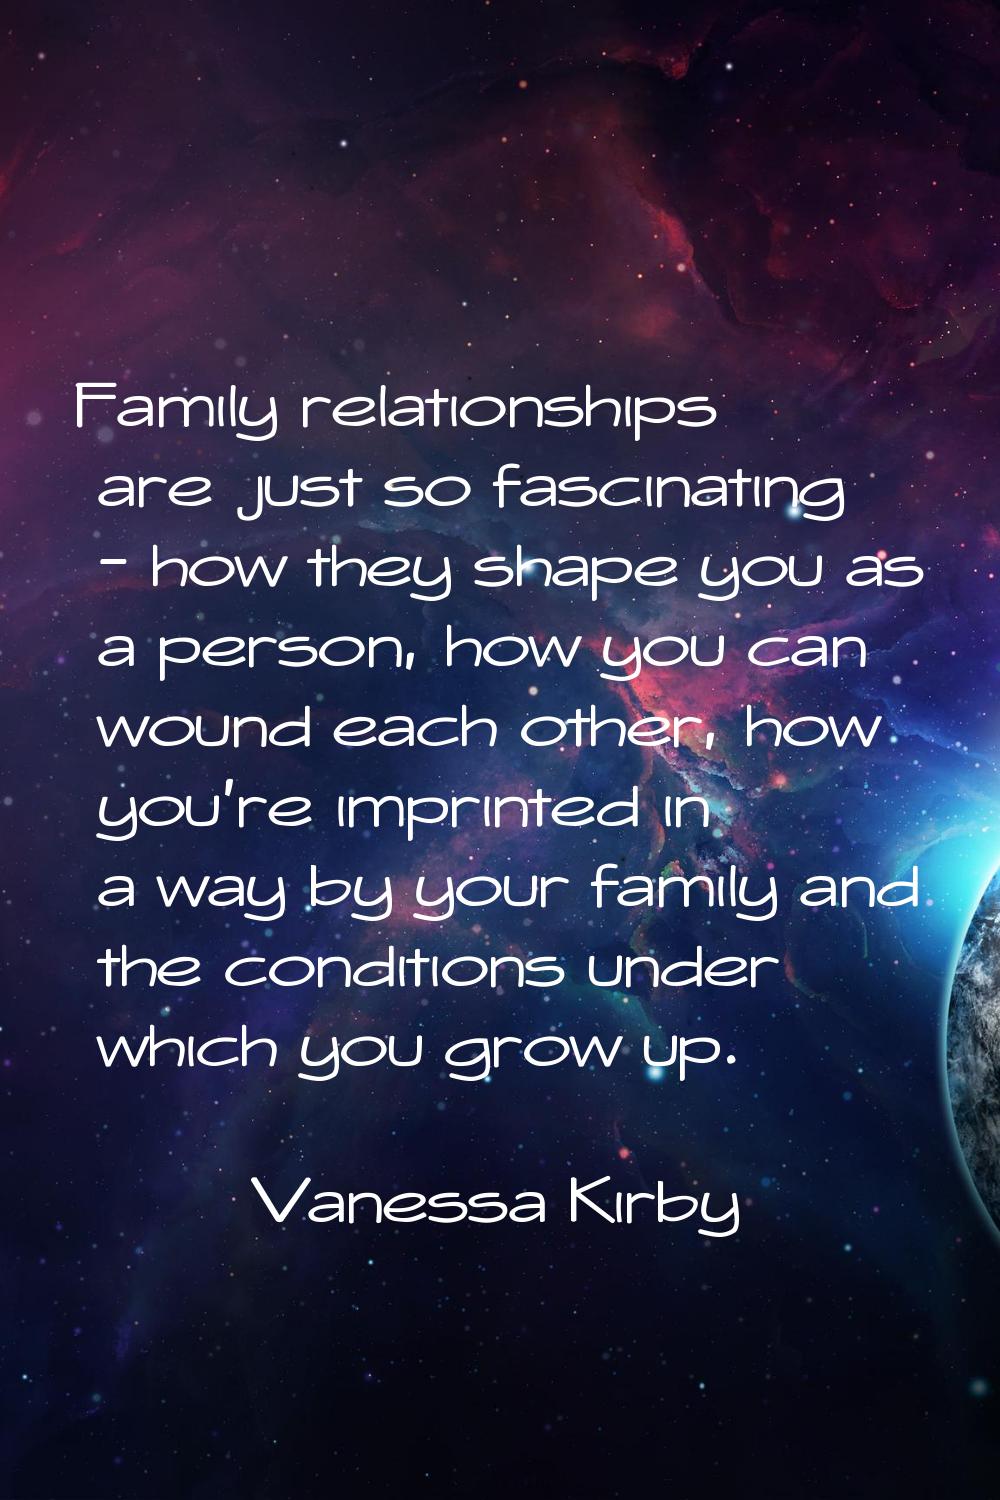 Family relationships are just so fascinating - how they shape you as a person, how you can wound ea